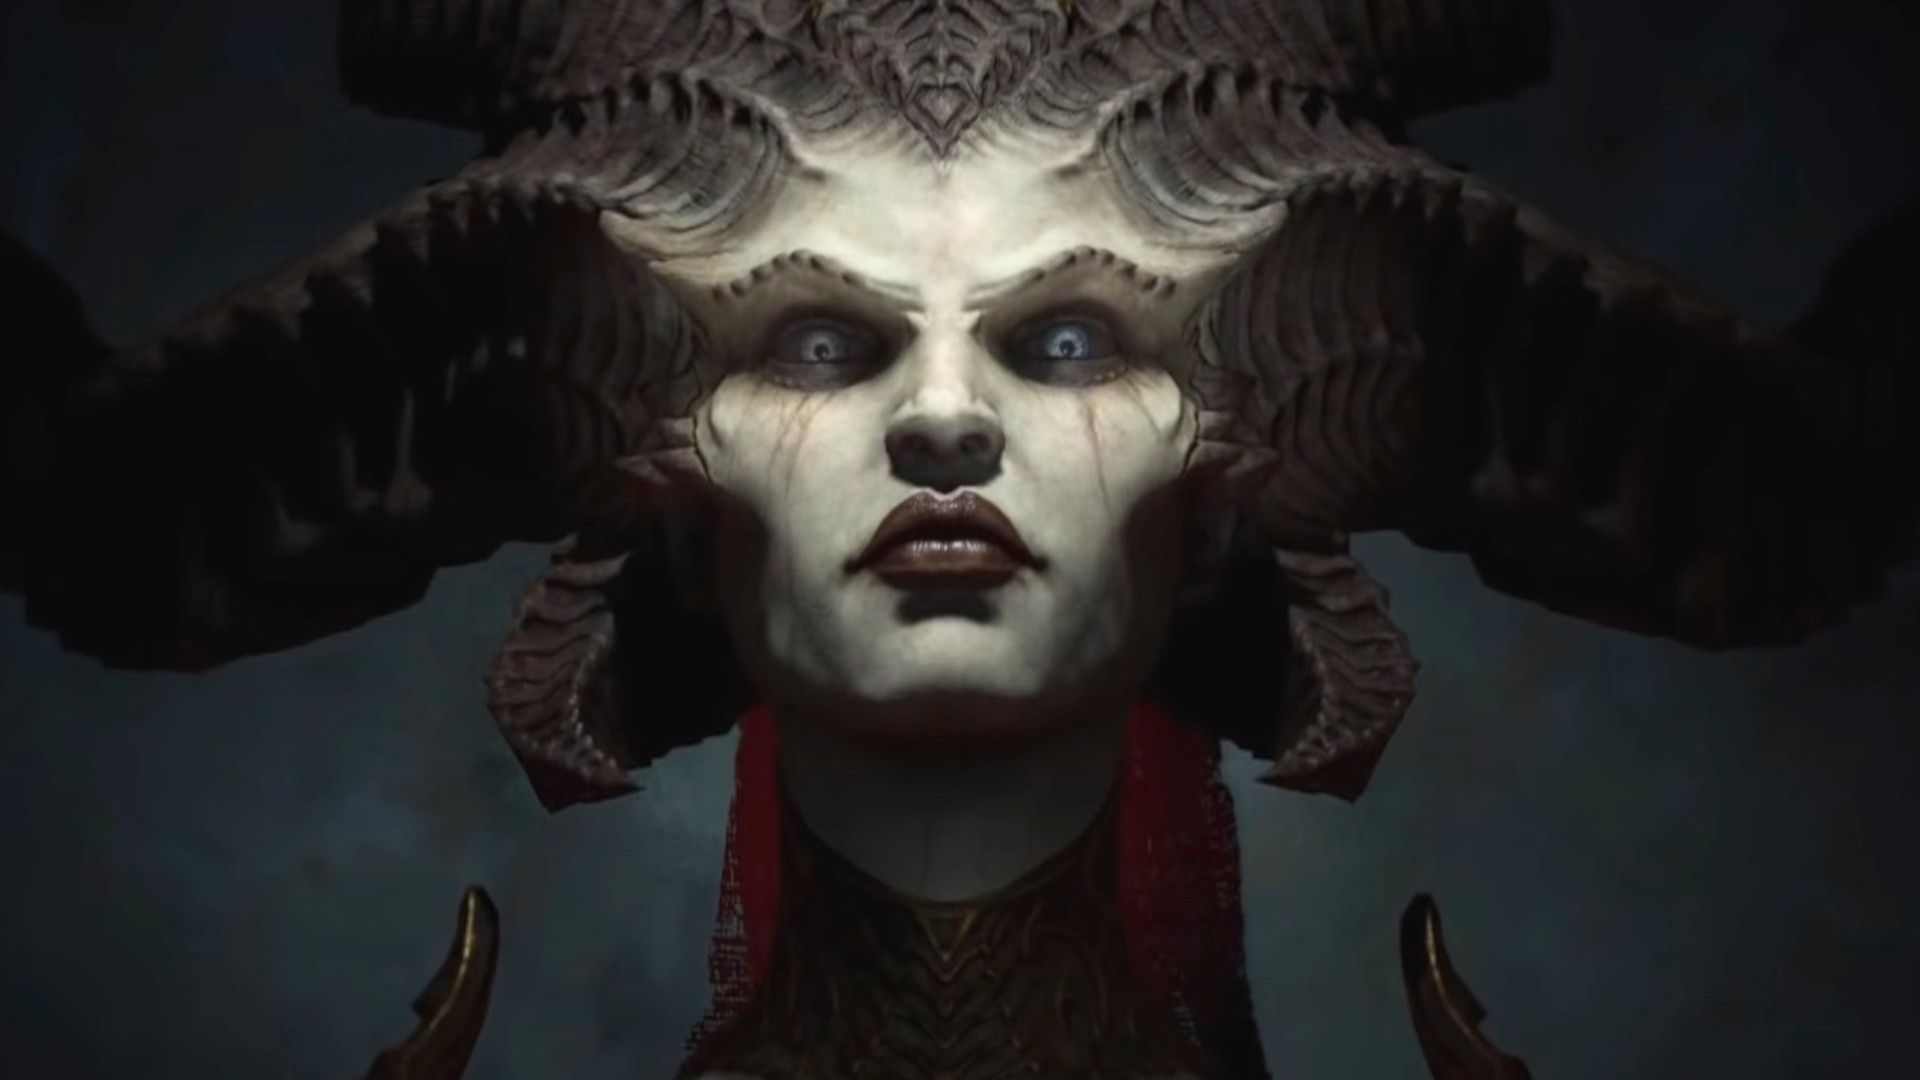 Diablo 4 will announce its release date in 2 days – when will the game appear?